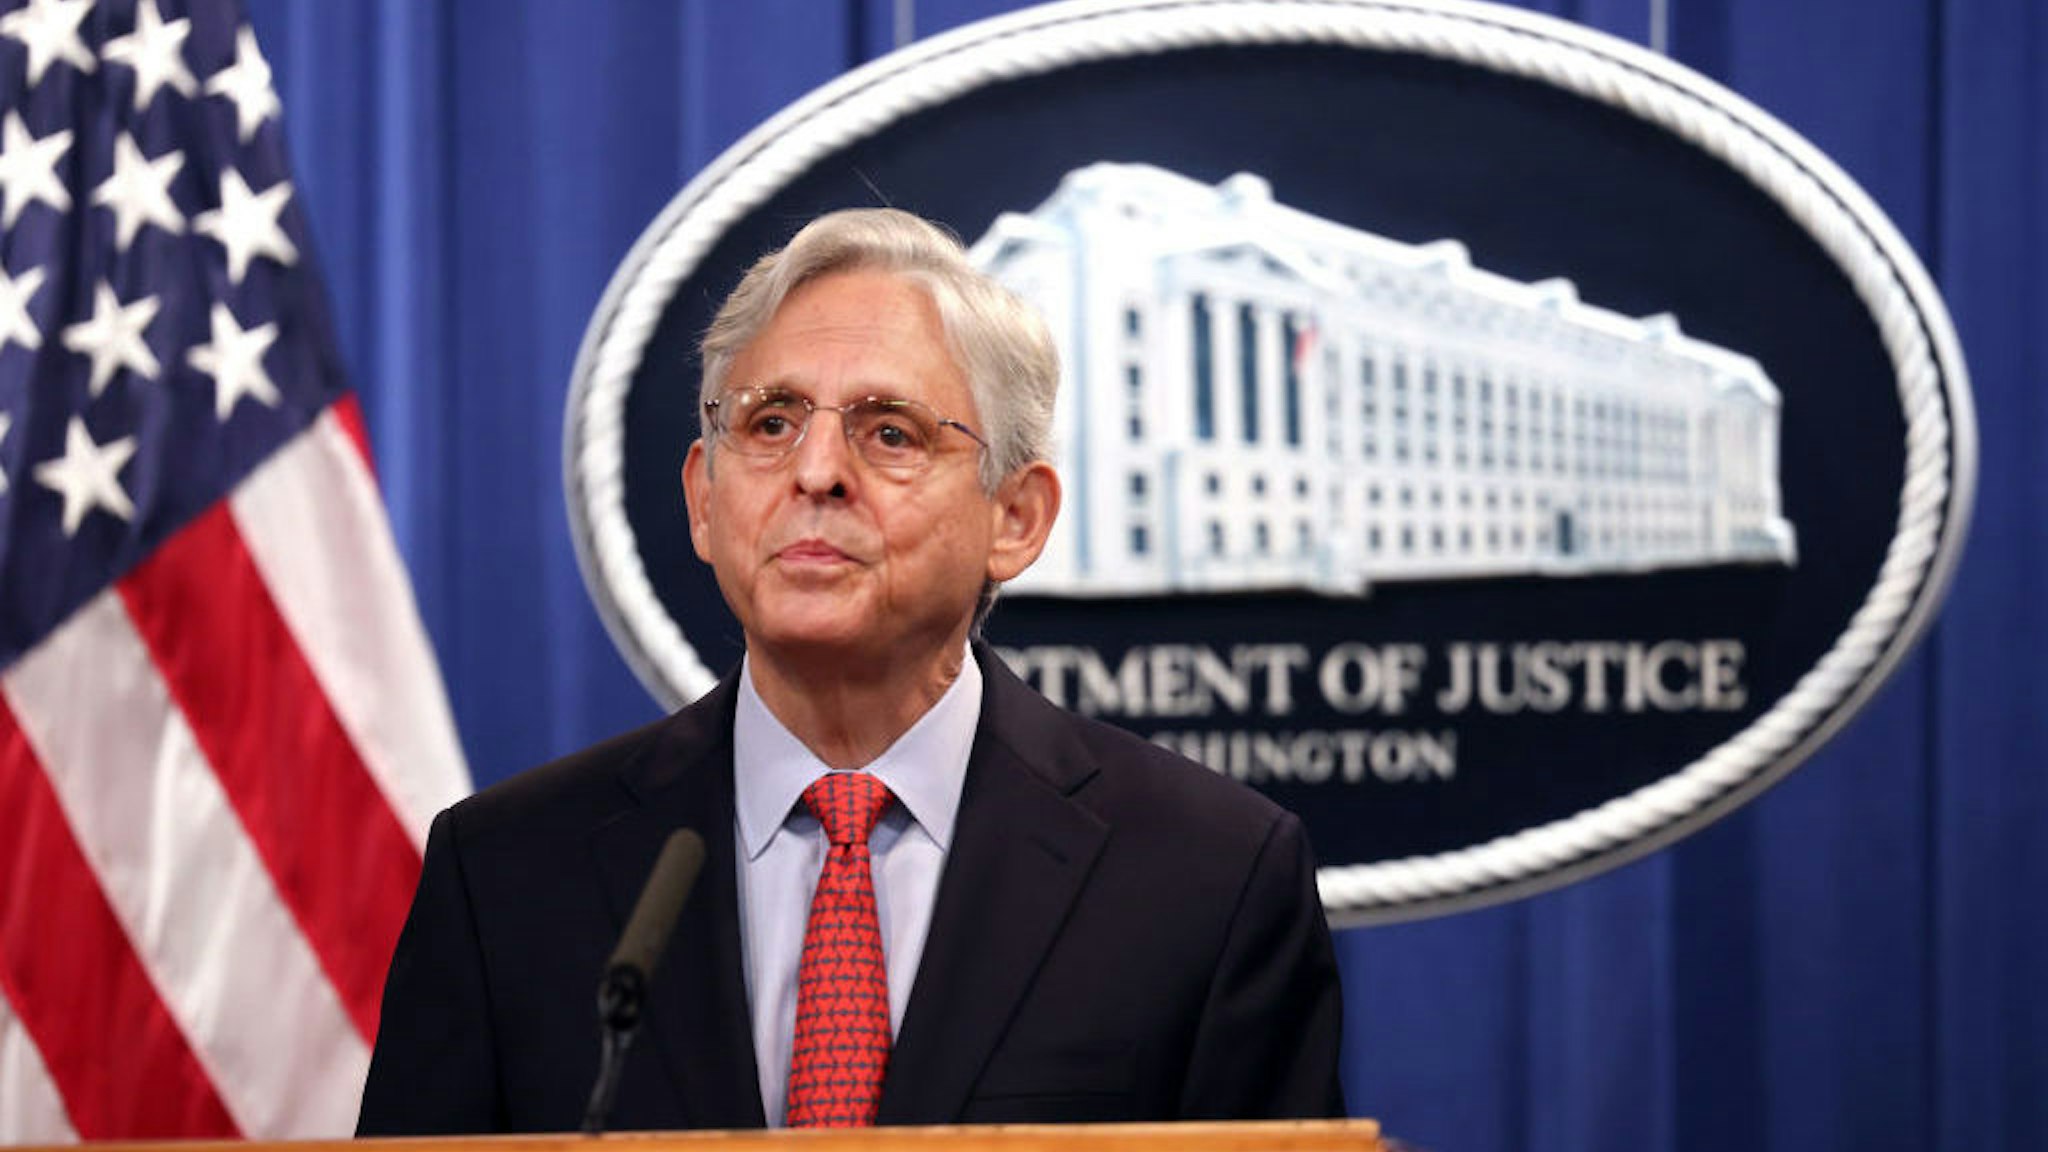 WASHINGTON, DC - AUGUST 05: U.S. Attorney General Merrick Garland announces a federal investigation of the City of Phoenix and the Phoenix Police Department during a news conference at the Department of Justice on August 05, 2021 in Washington, DC. Garland said the Justice Department has opened a pattern or practice investigation into the City of Phoenix and the Phoenix Police Department to determine if they have violated federal laws or citizens constitutional rights. (Photo by Kevin Dietsch/Getty Images)